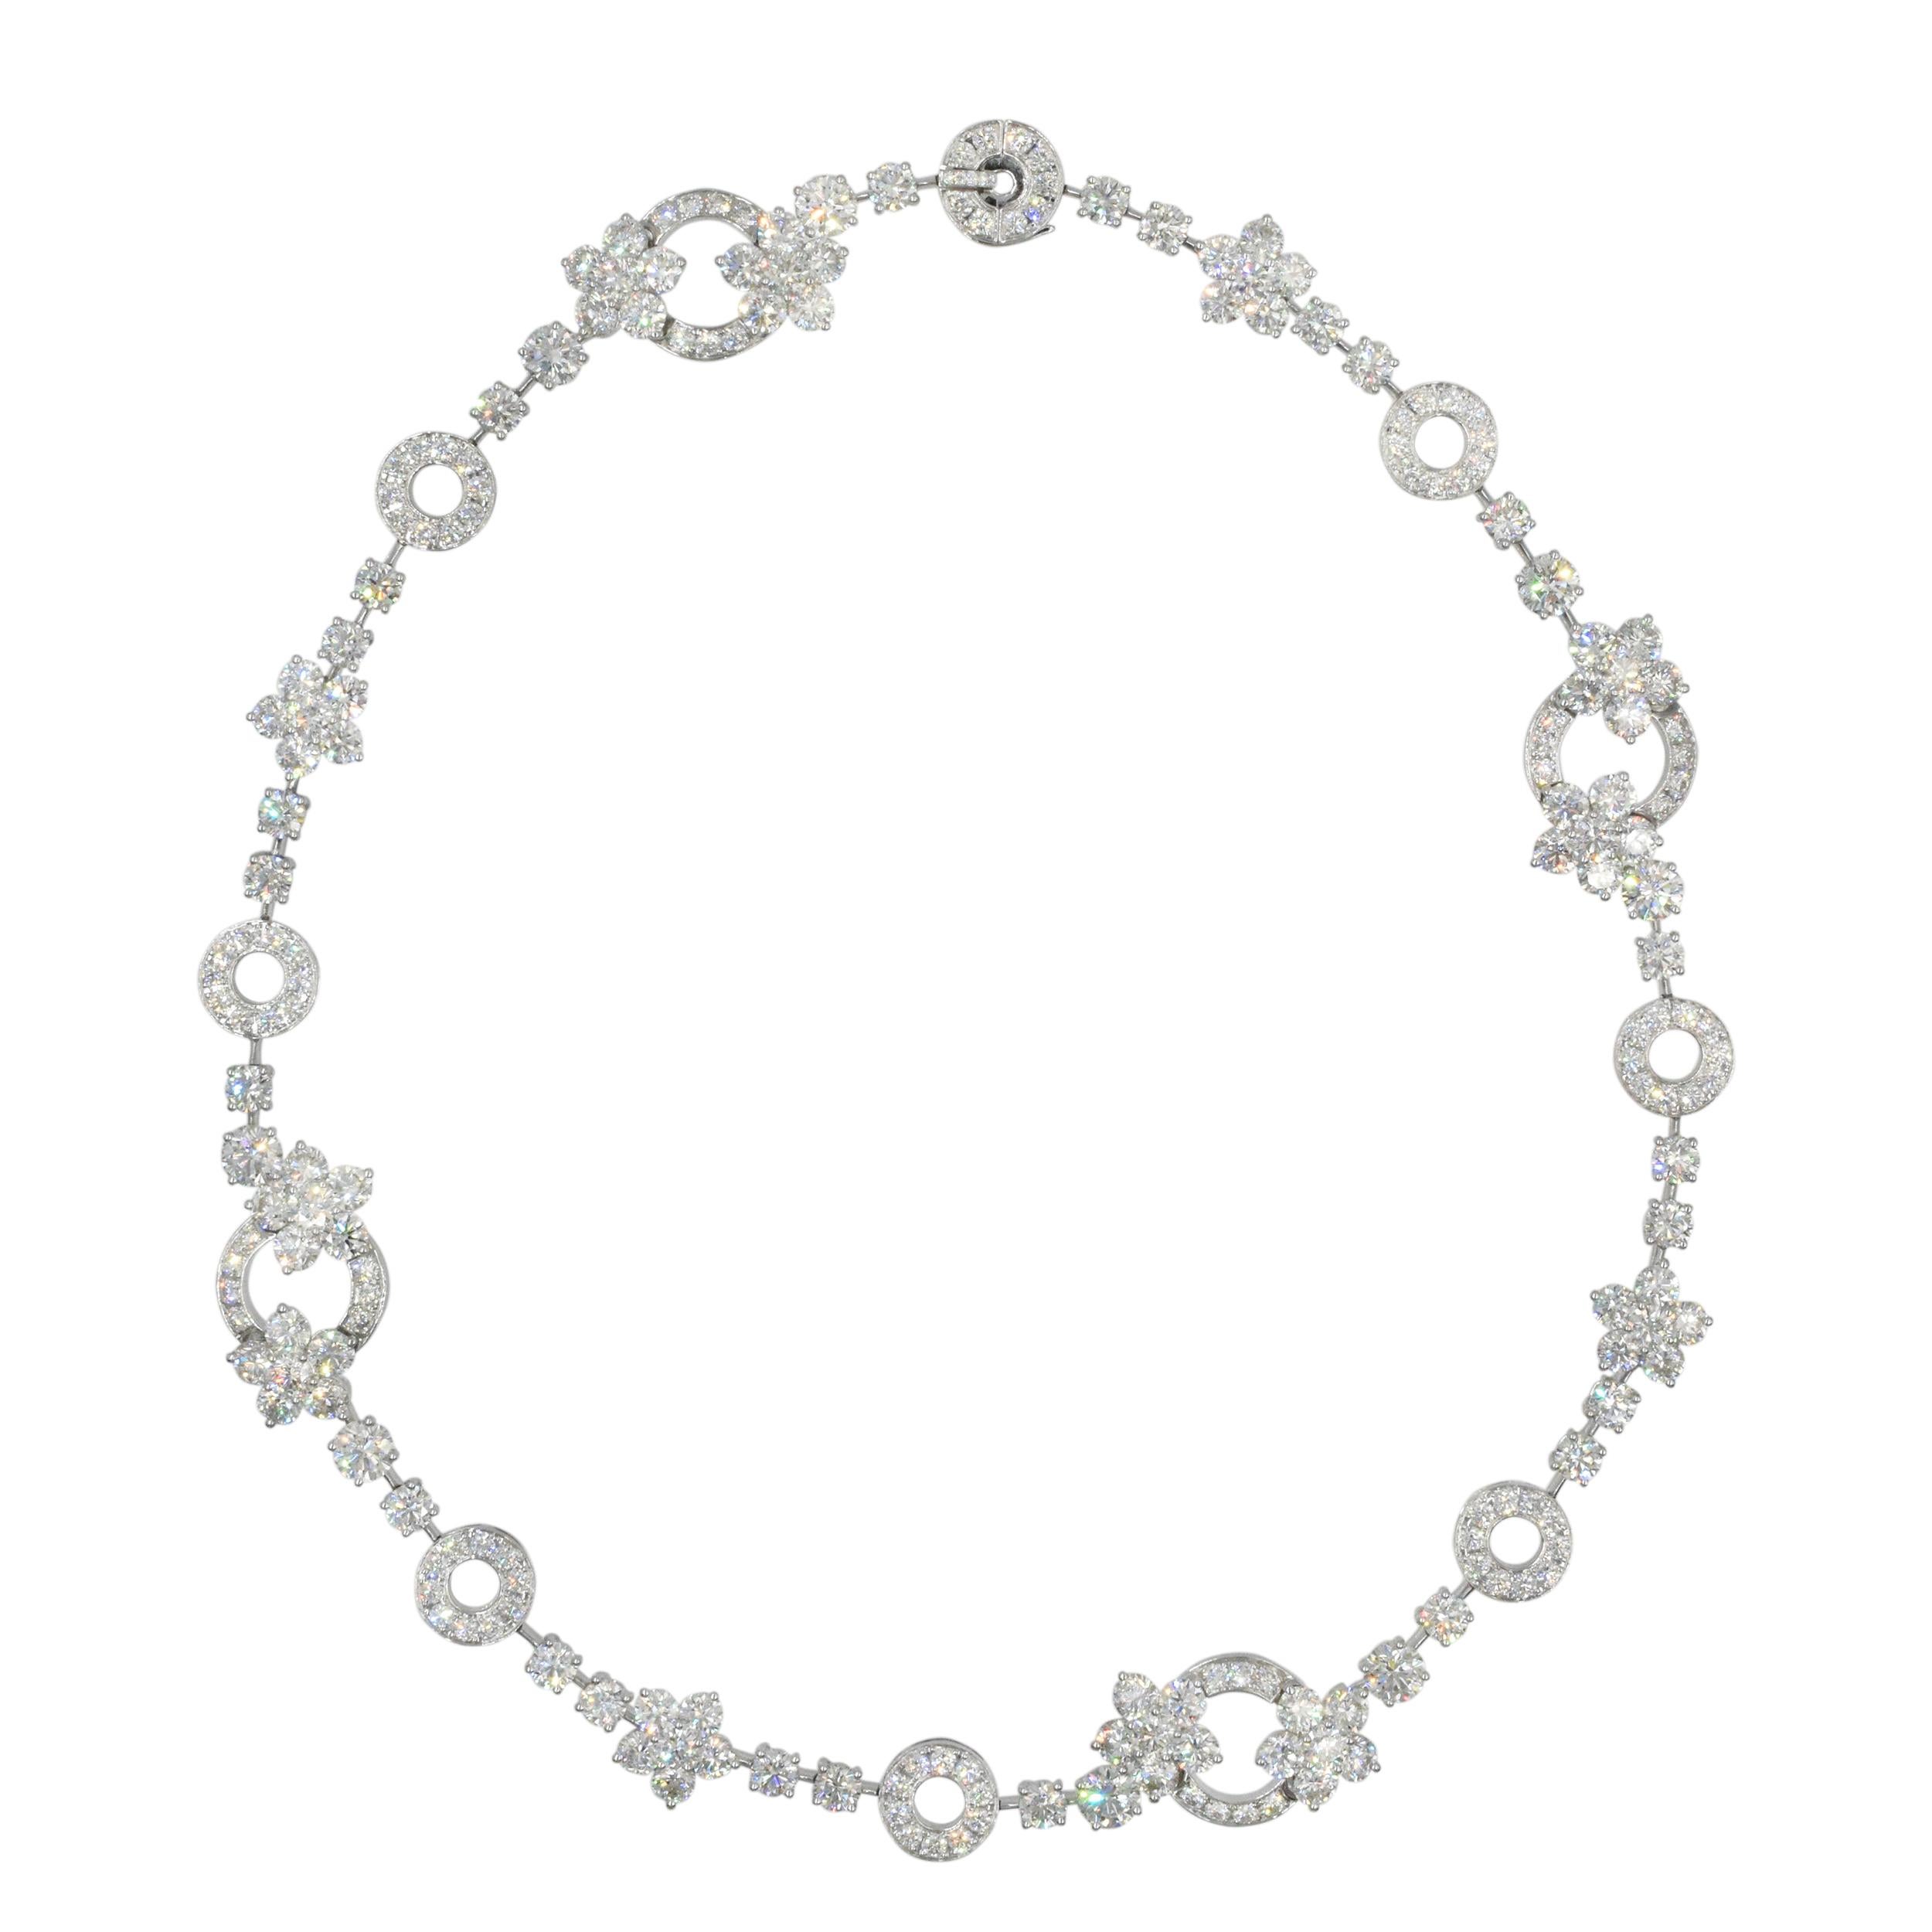 GRAFF DIAMOND NECKLACE 
This necklace has circular cut diamonds weighing a total of
34.46 carats very fine quality diamonds all set in 18k white gold, signed Graff, no. GN0000 
.Length: 15.75 inches (40.0 cm), 